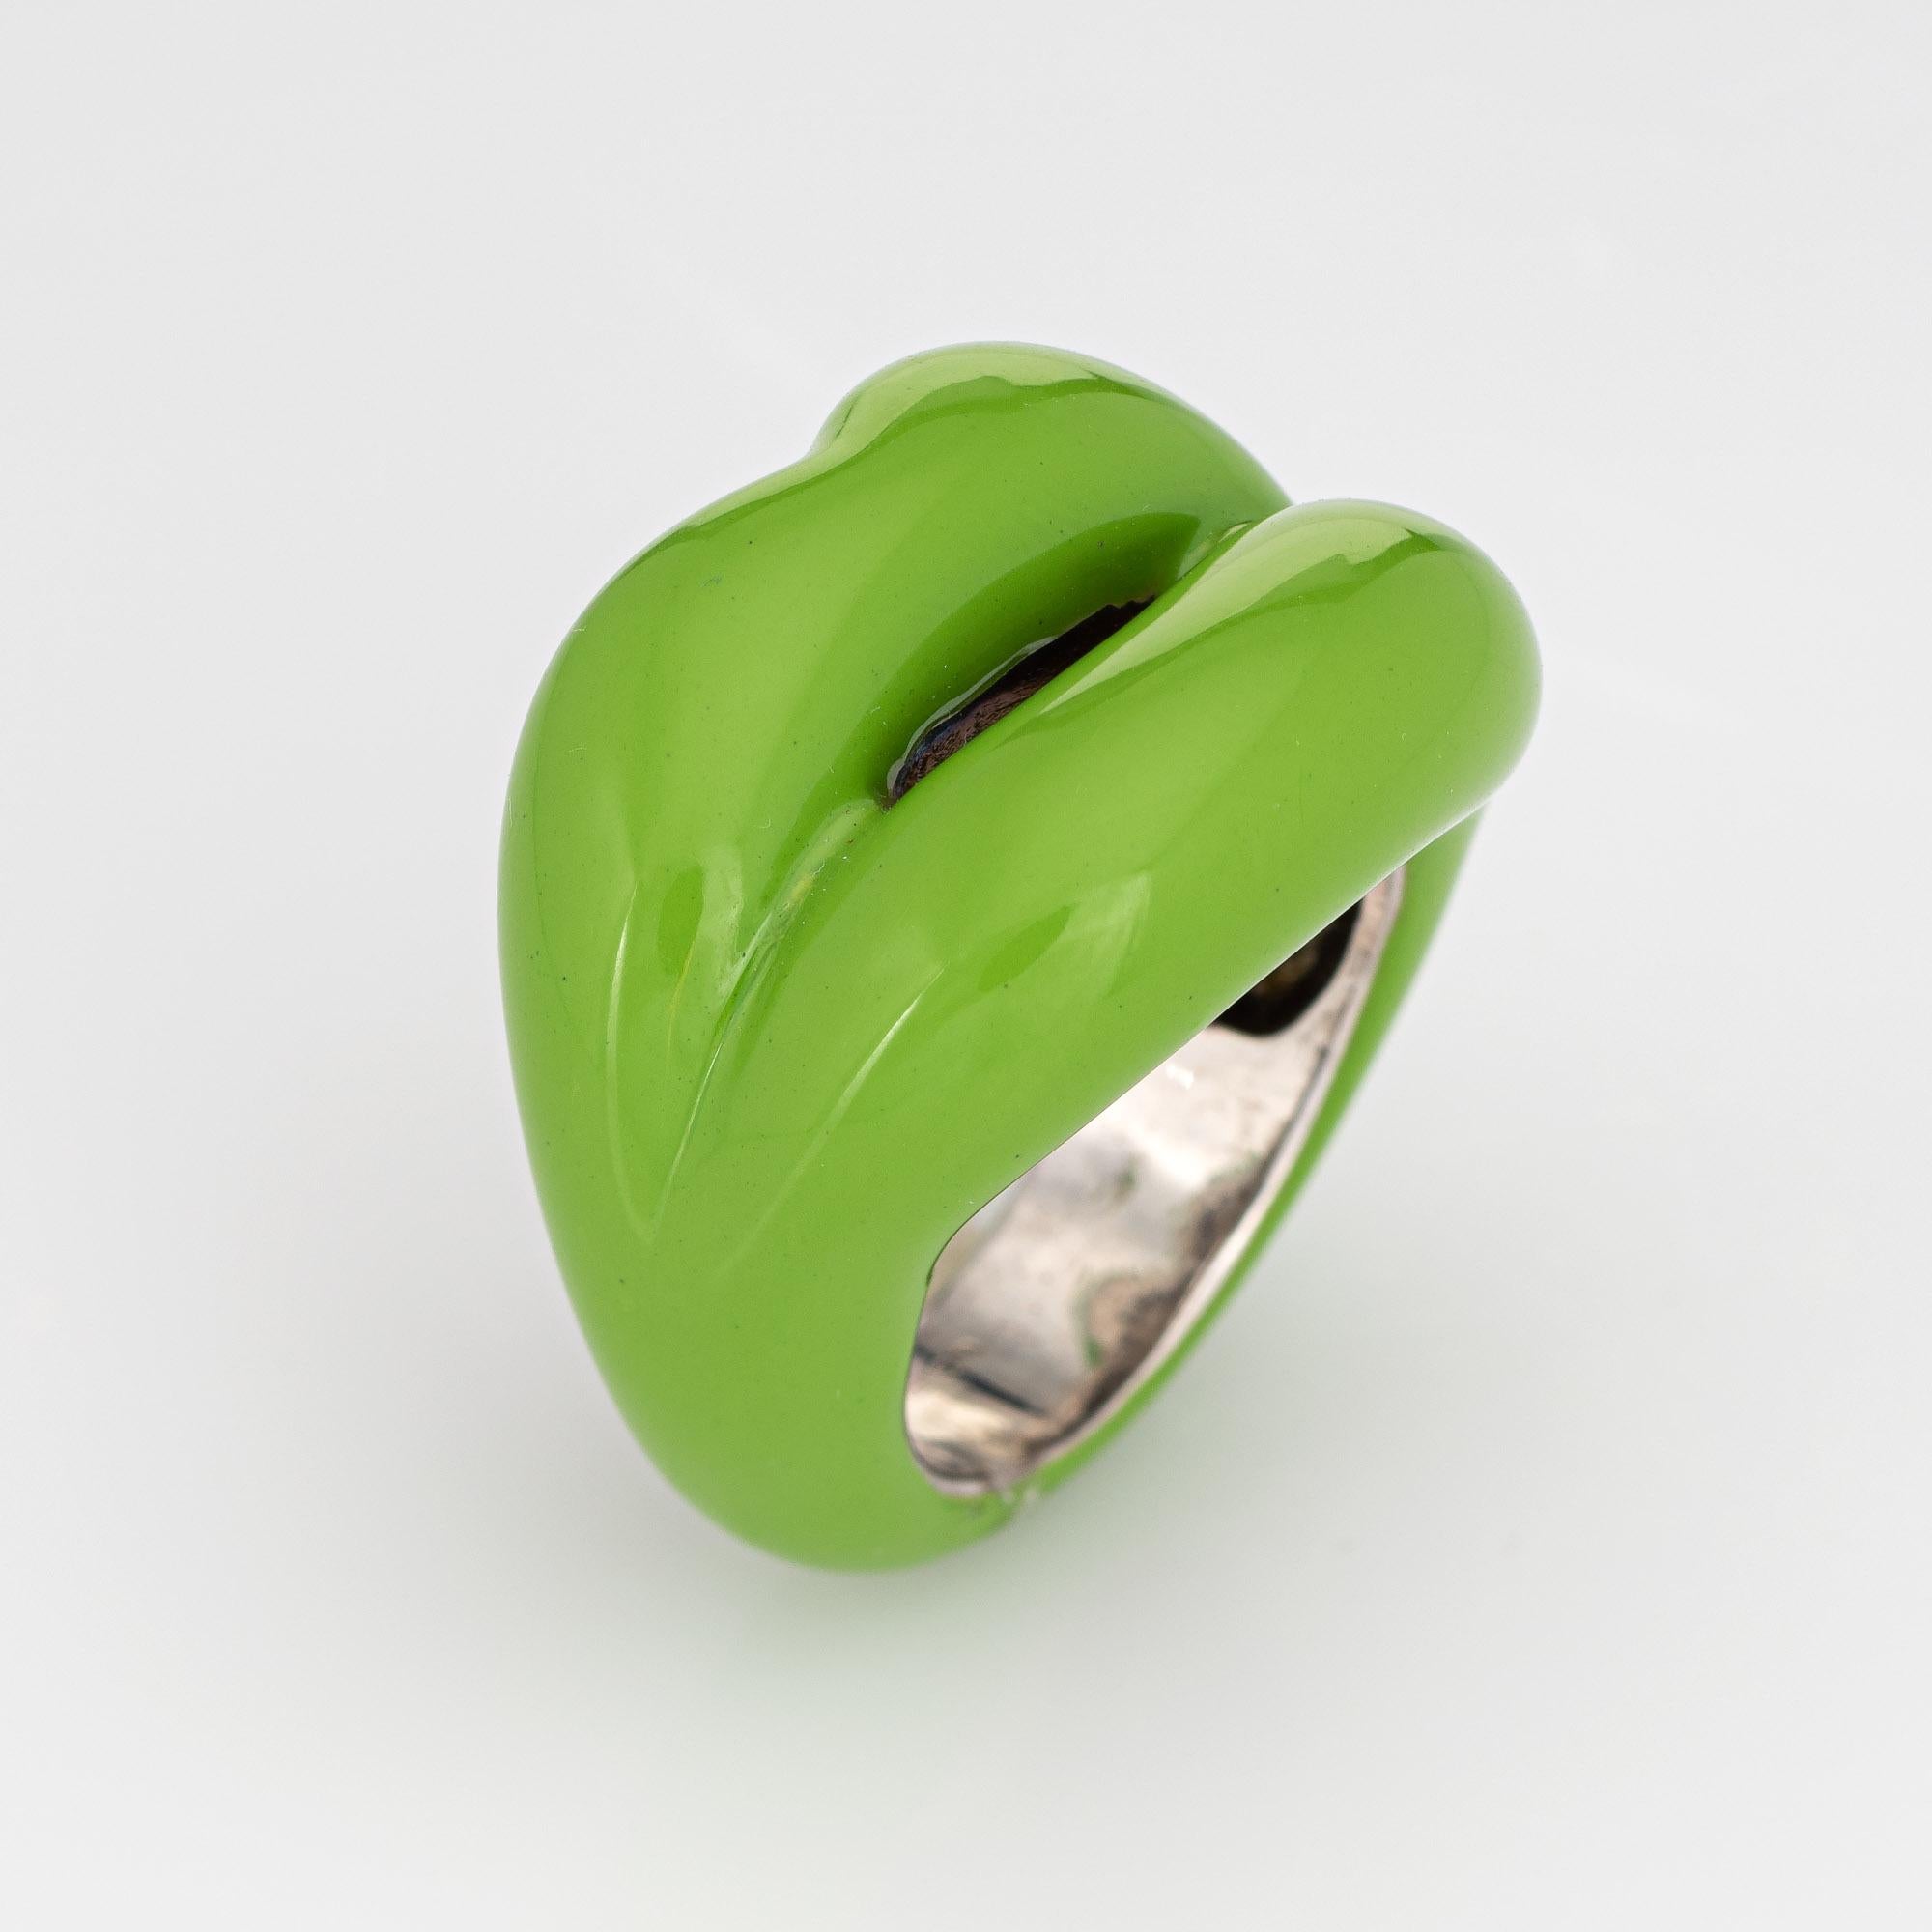 Stylish pre-owned Solange Azagury Partridge ring crafted in sterling silver. 

The 'hotlips' ring by Solange is rendered in green enamel. The low rise ring (6mm - 0.23 inches) sits comfortably on the finger. The ring retailed for $1,650. 

The ring